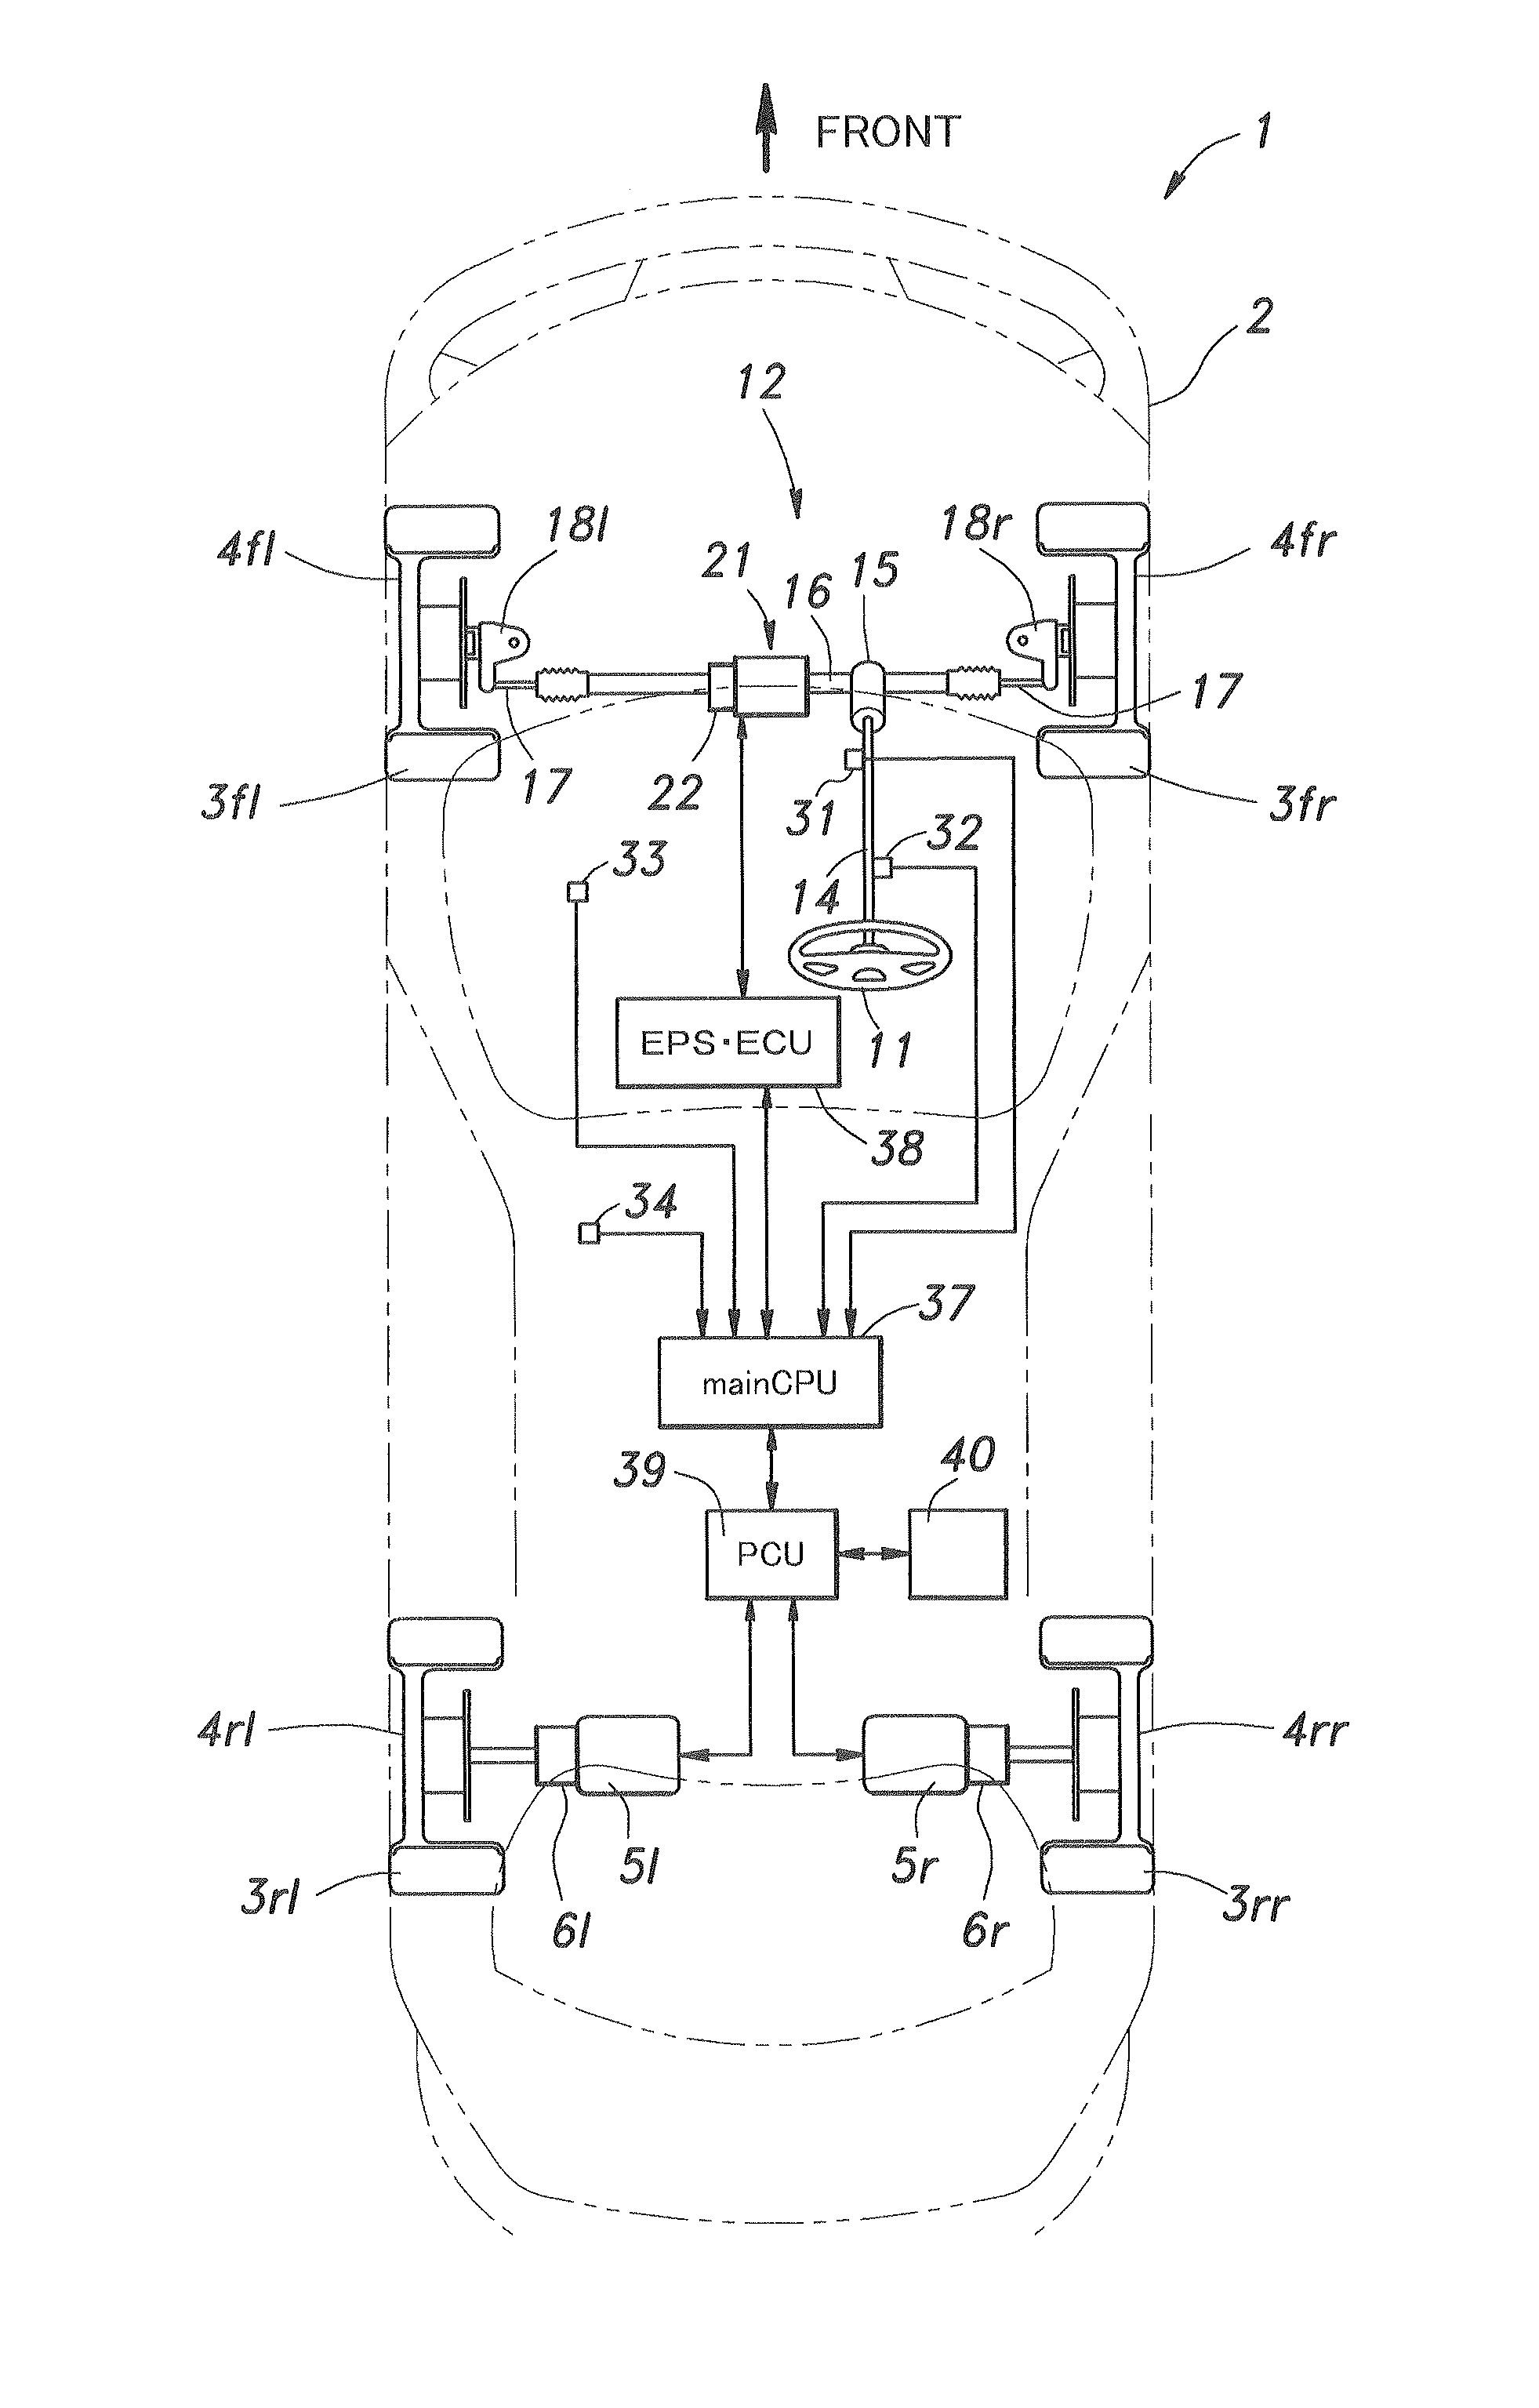 Vehicle steering system